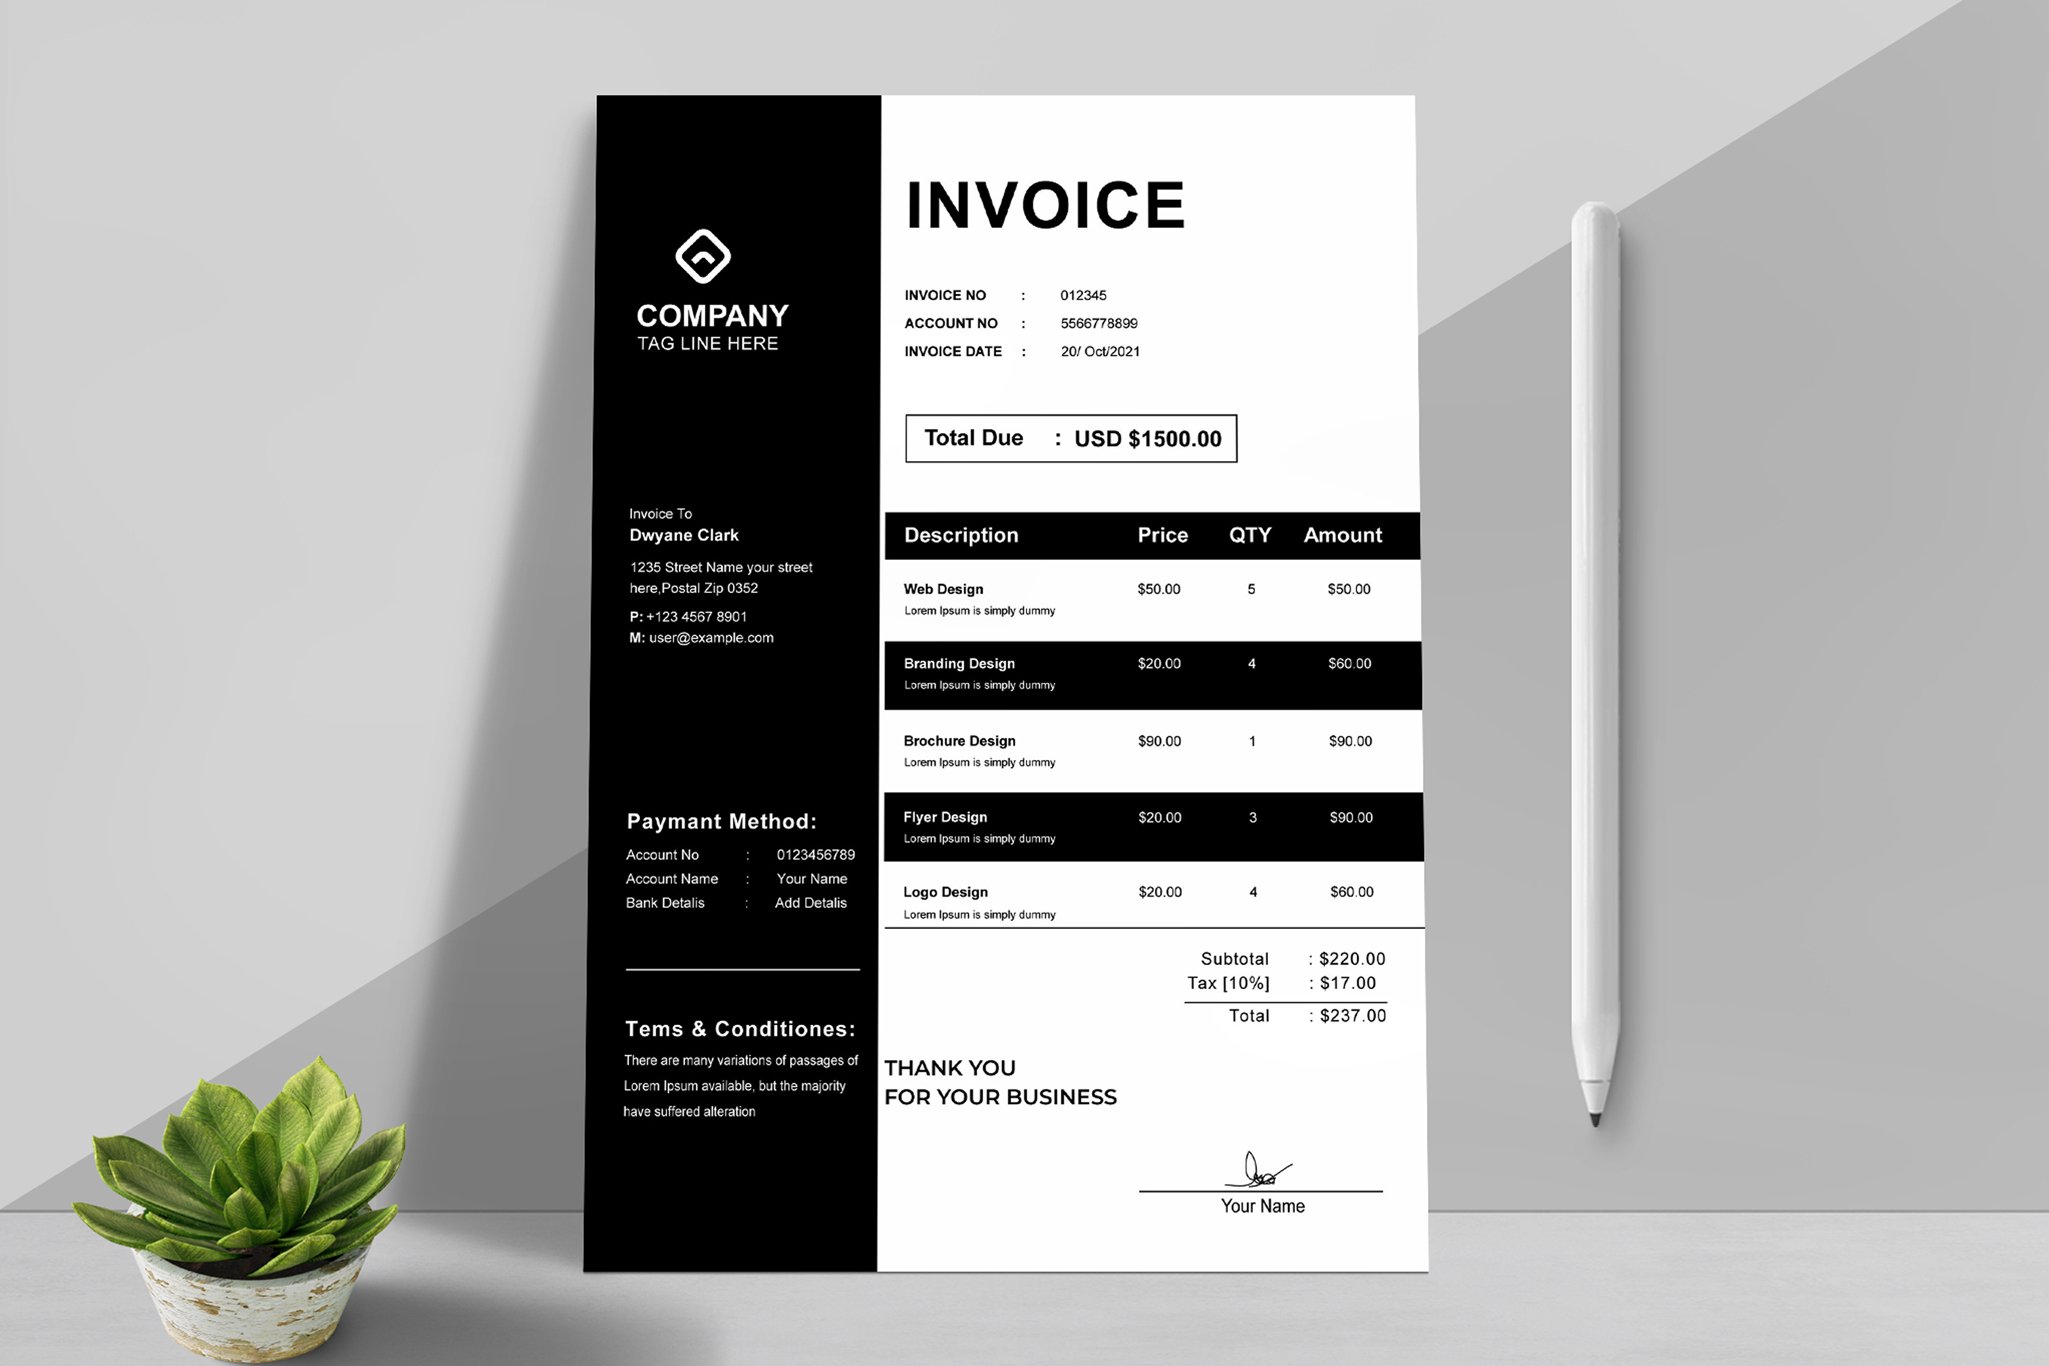 Invoice Layout With Black Sidebar cover image.